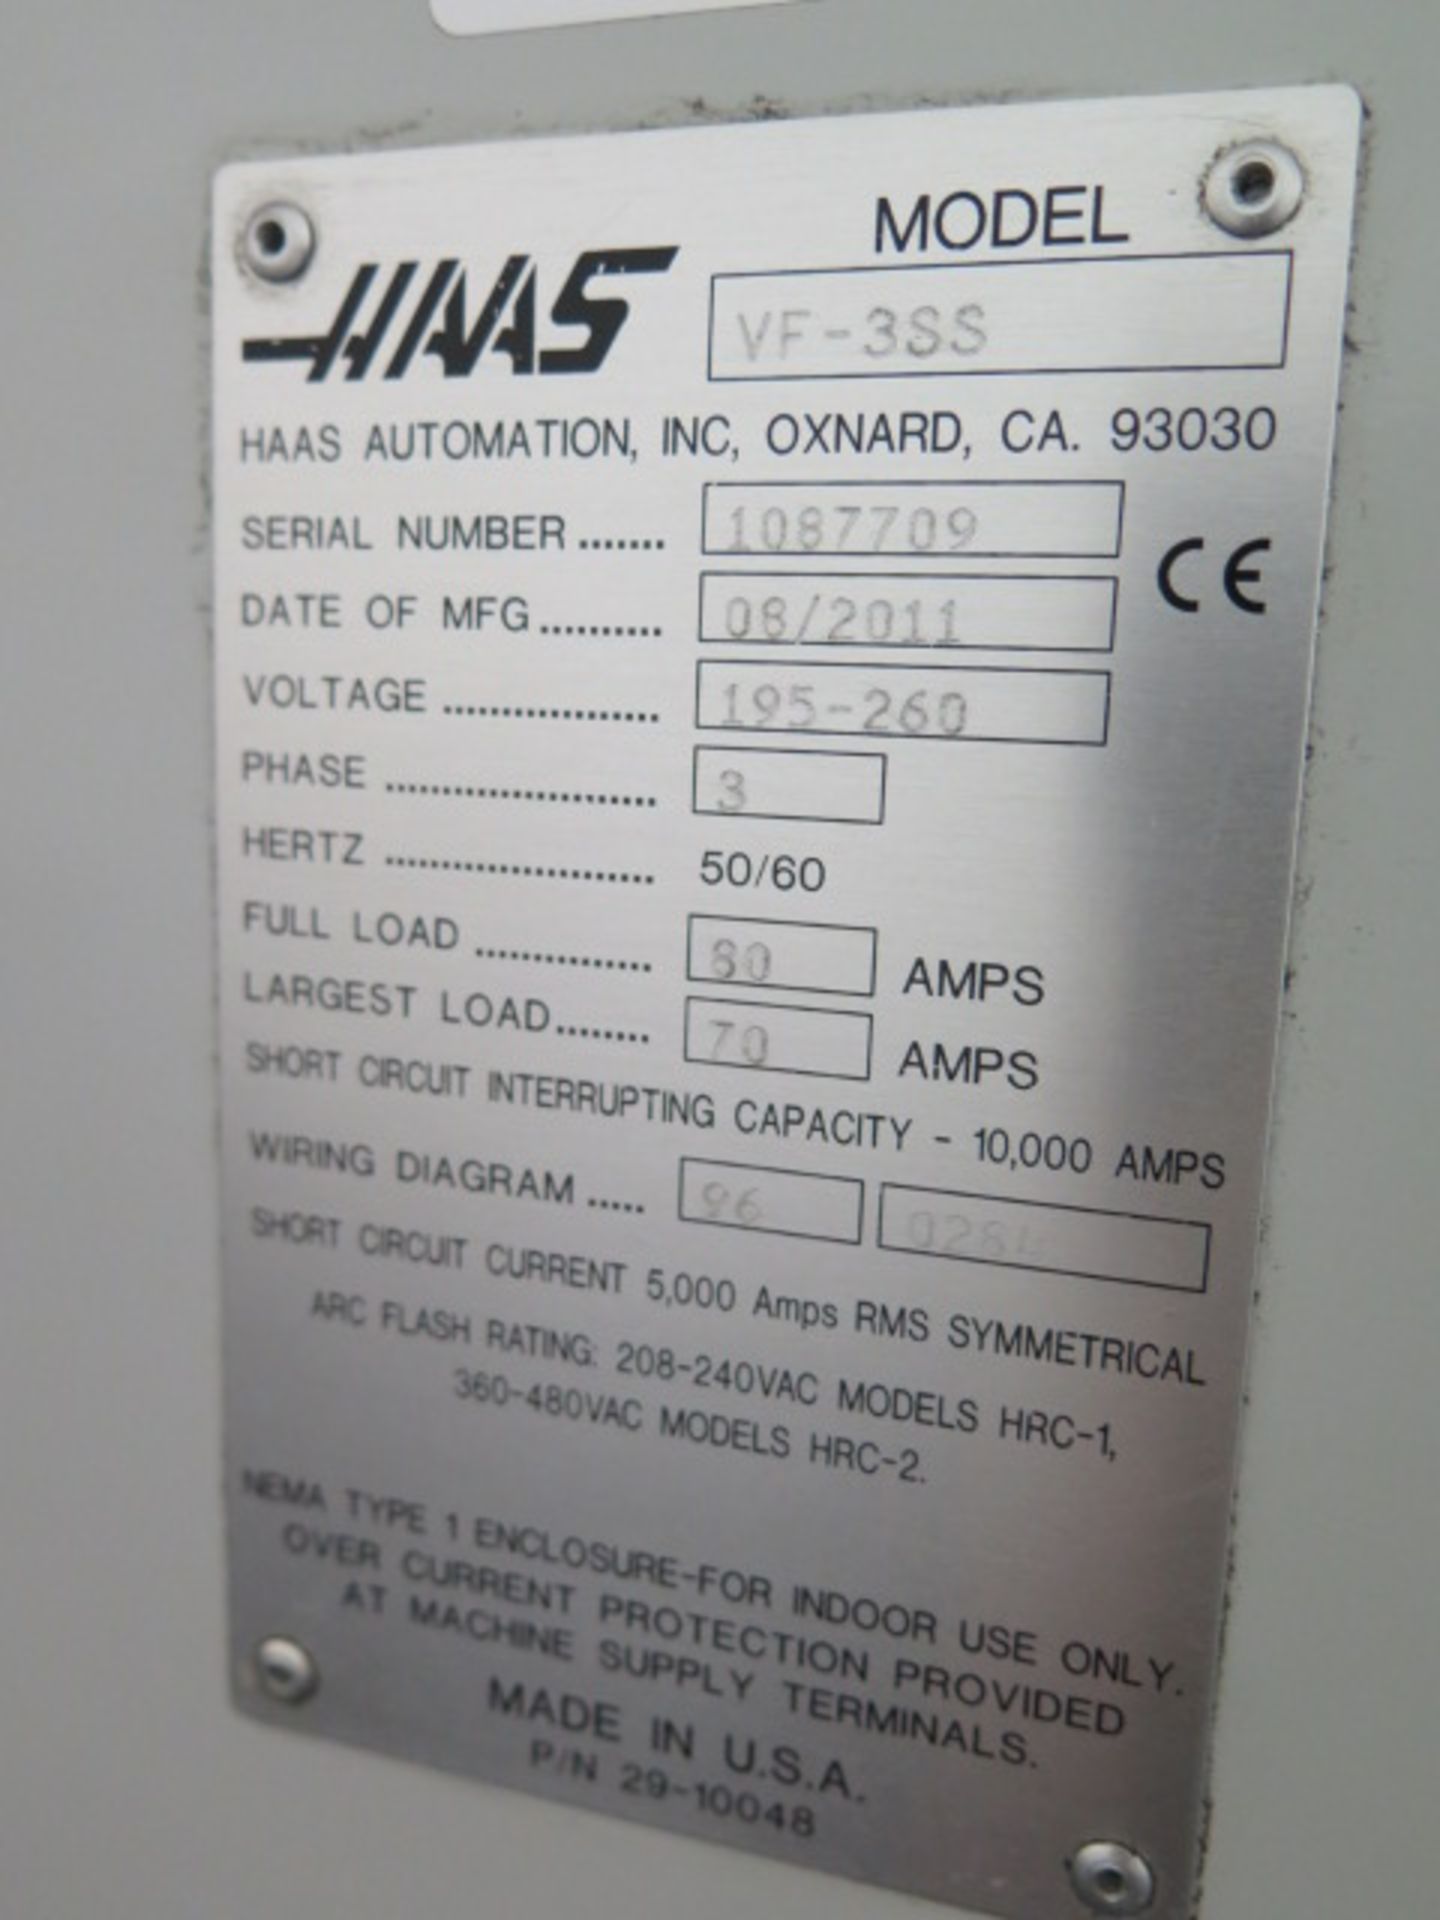 2011 Haas VF-3SS 4-Axis CNC Vertical Machining Center s/n 1087709 w/ Haas Controls, Hand Wheel, 24-S - Image 17 of 17